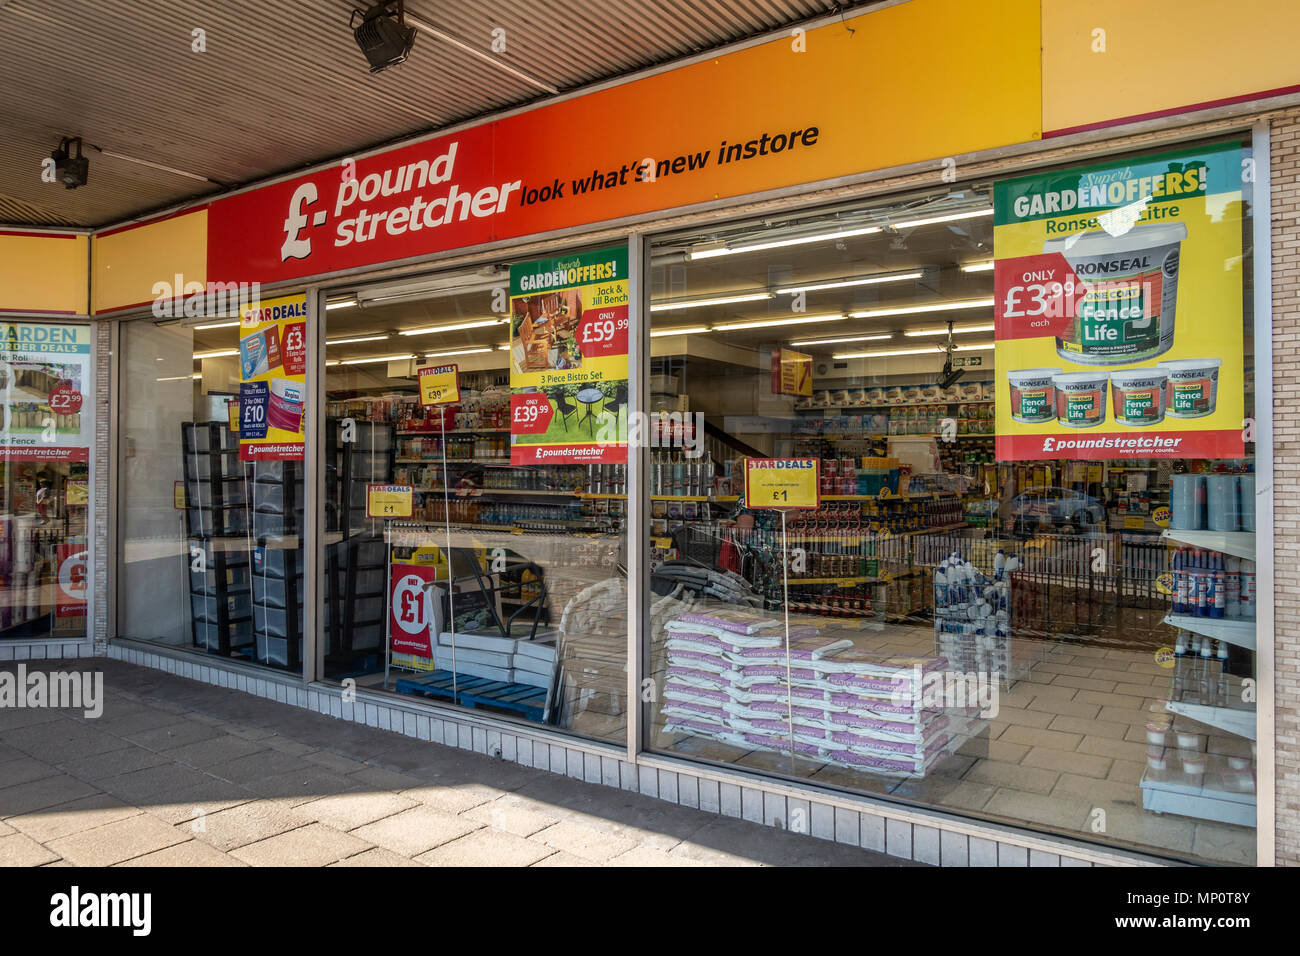 Exterior of a Poundstretcher discount shop in Hamilton, South Lanarkshire, Scotland, UK. Posters, display units and goods for sale. Stock Photo